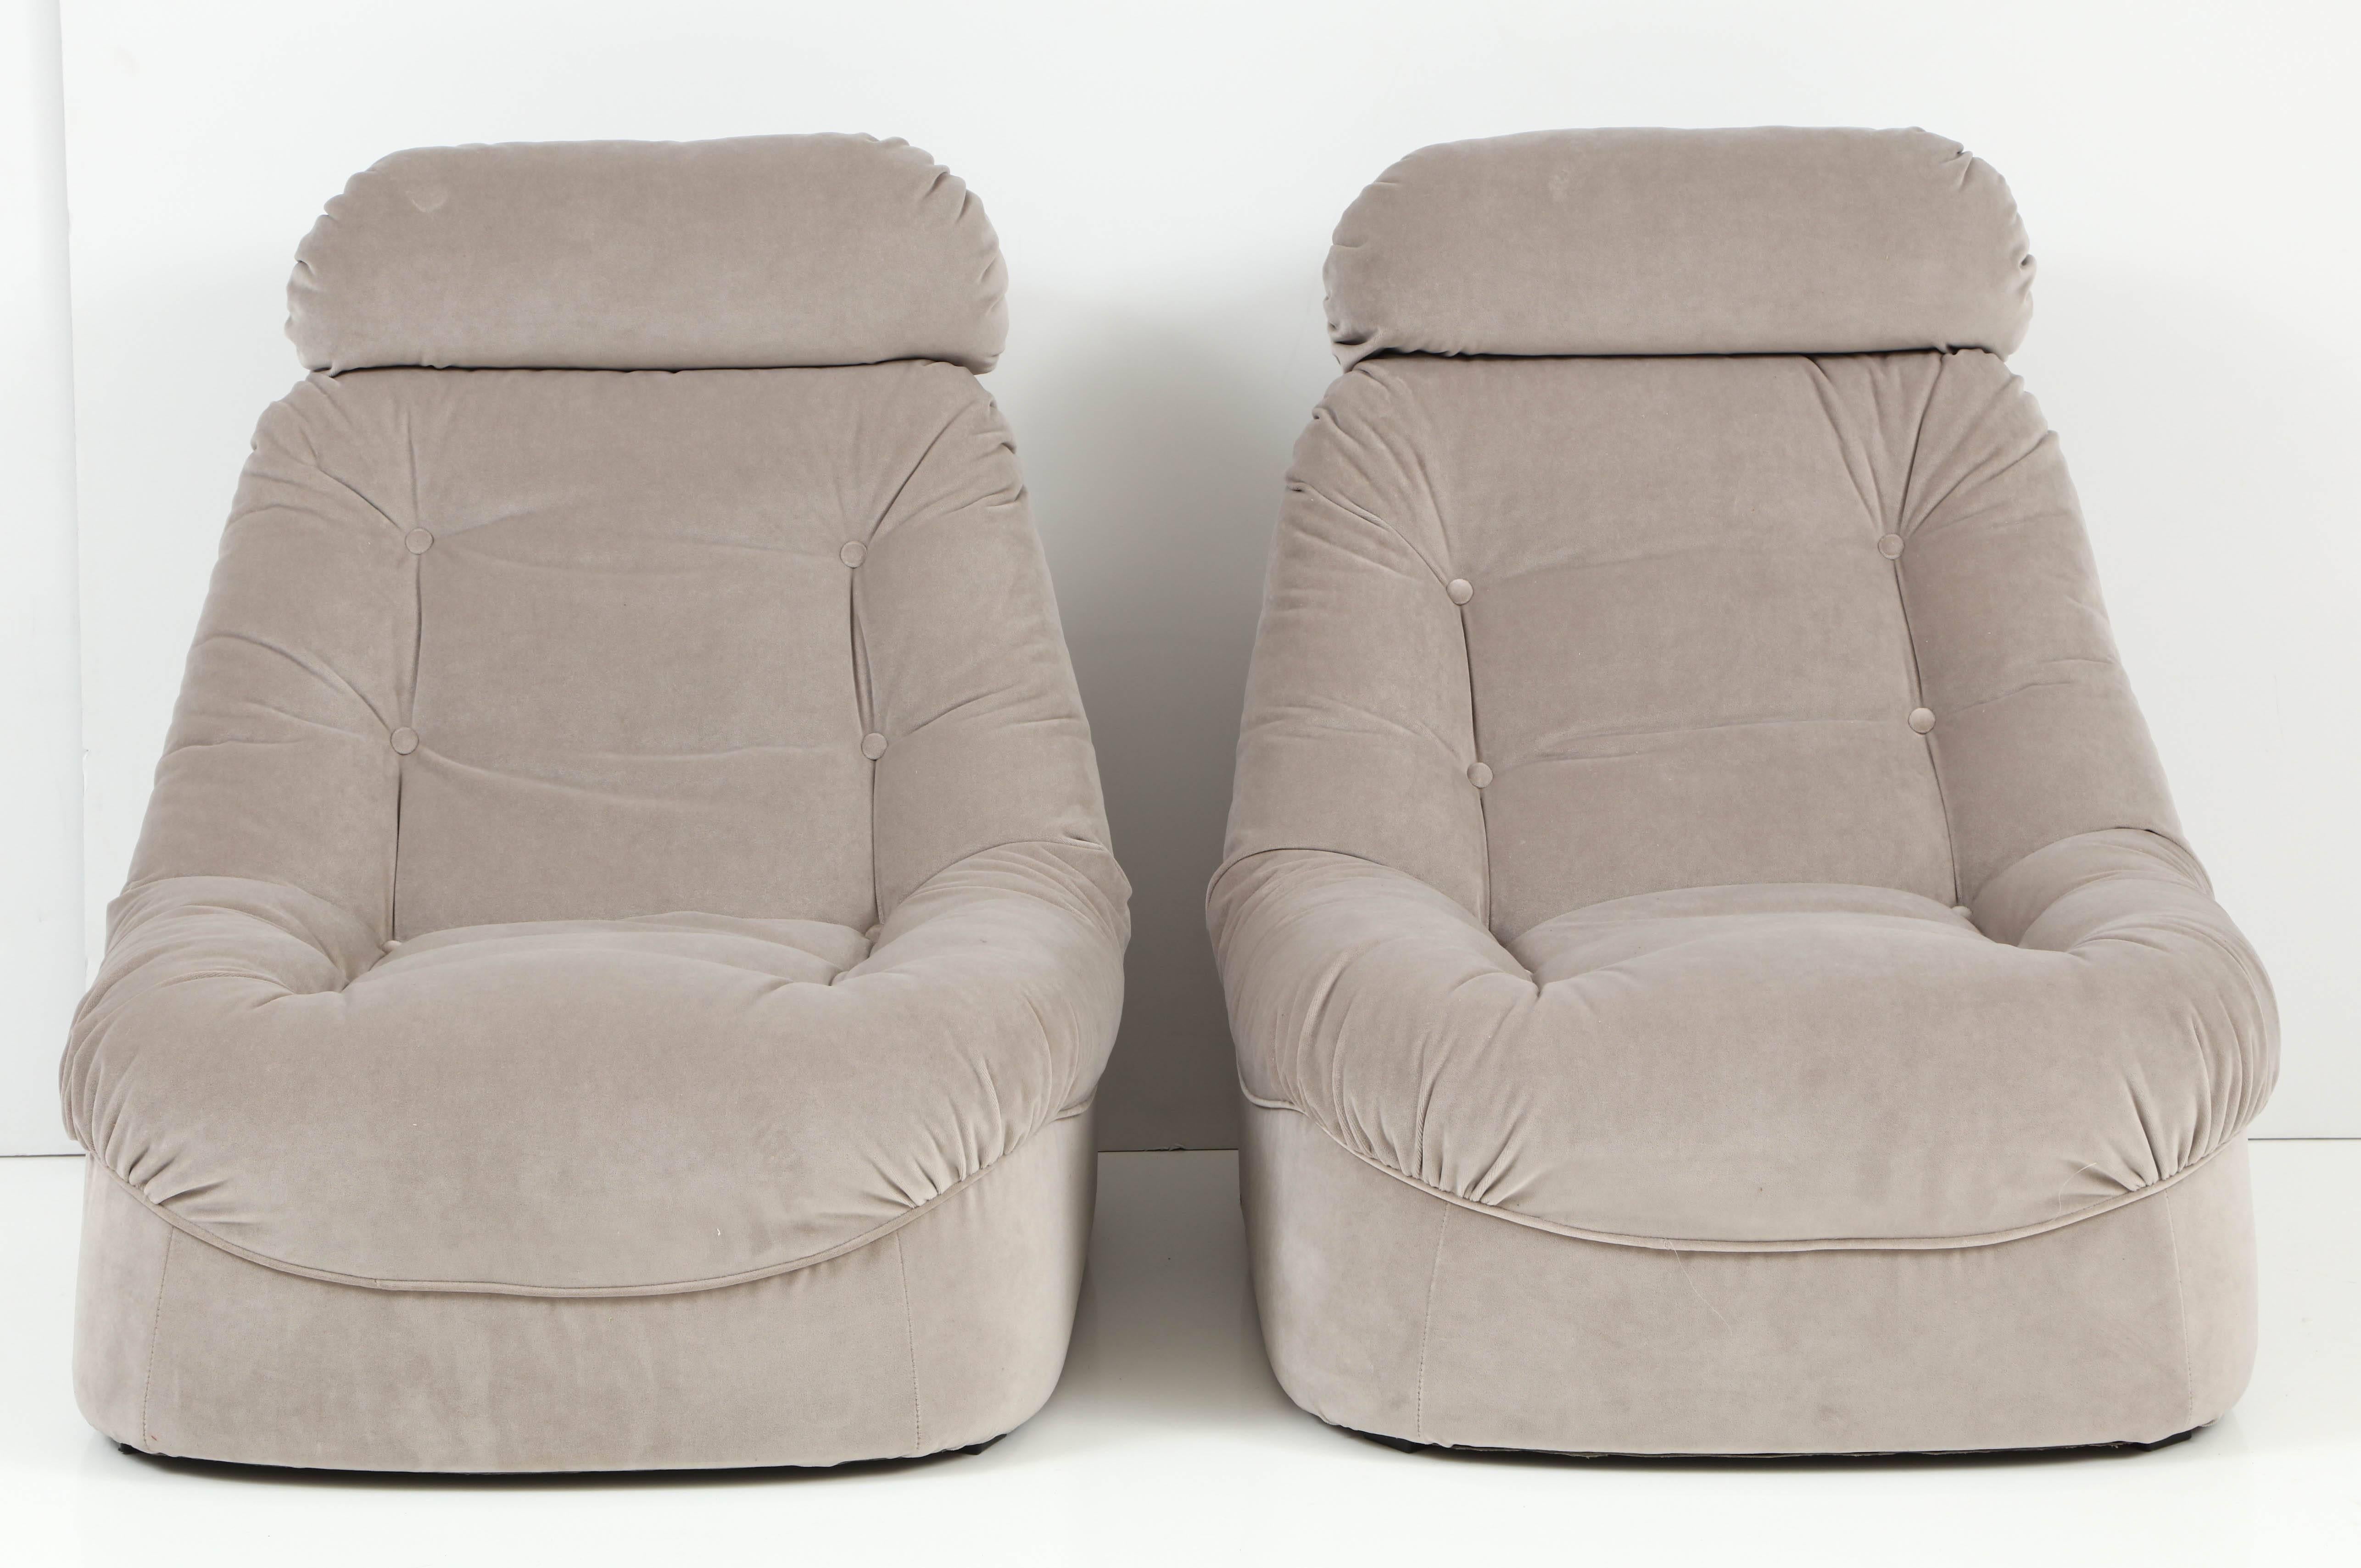 Very comfortable and solid lean back lounge chairs completely restored and newly upholstered with tufted backs and seats in a taupe gray imported cotton velvet. Sculptural in design.

This pair of lounge or slipper chairs is on display at the